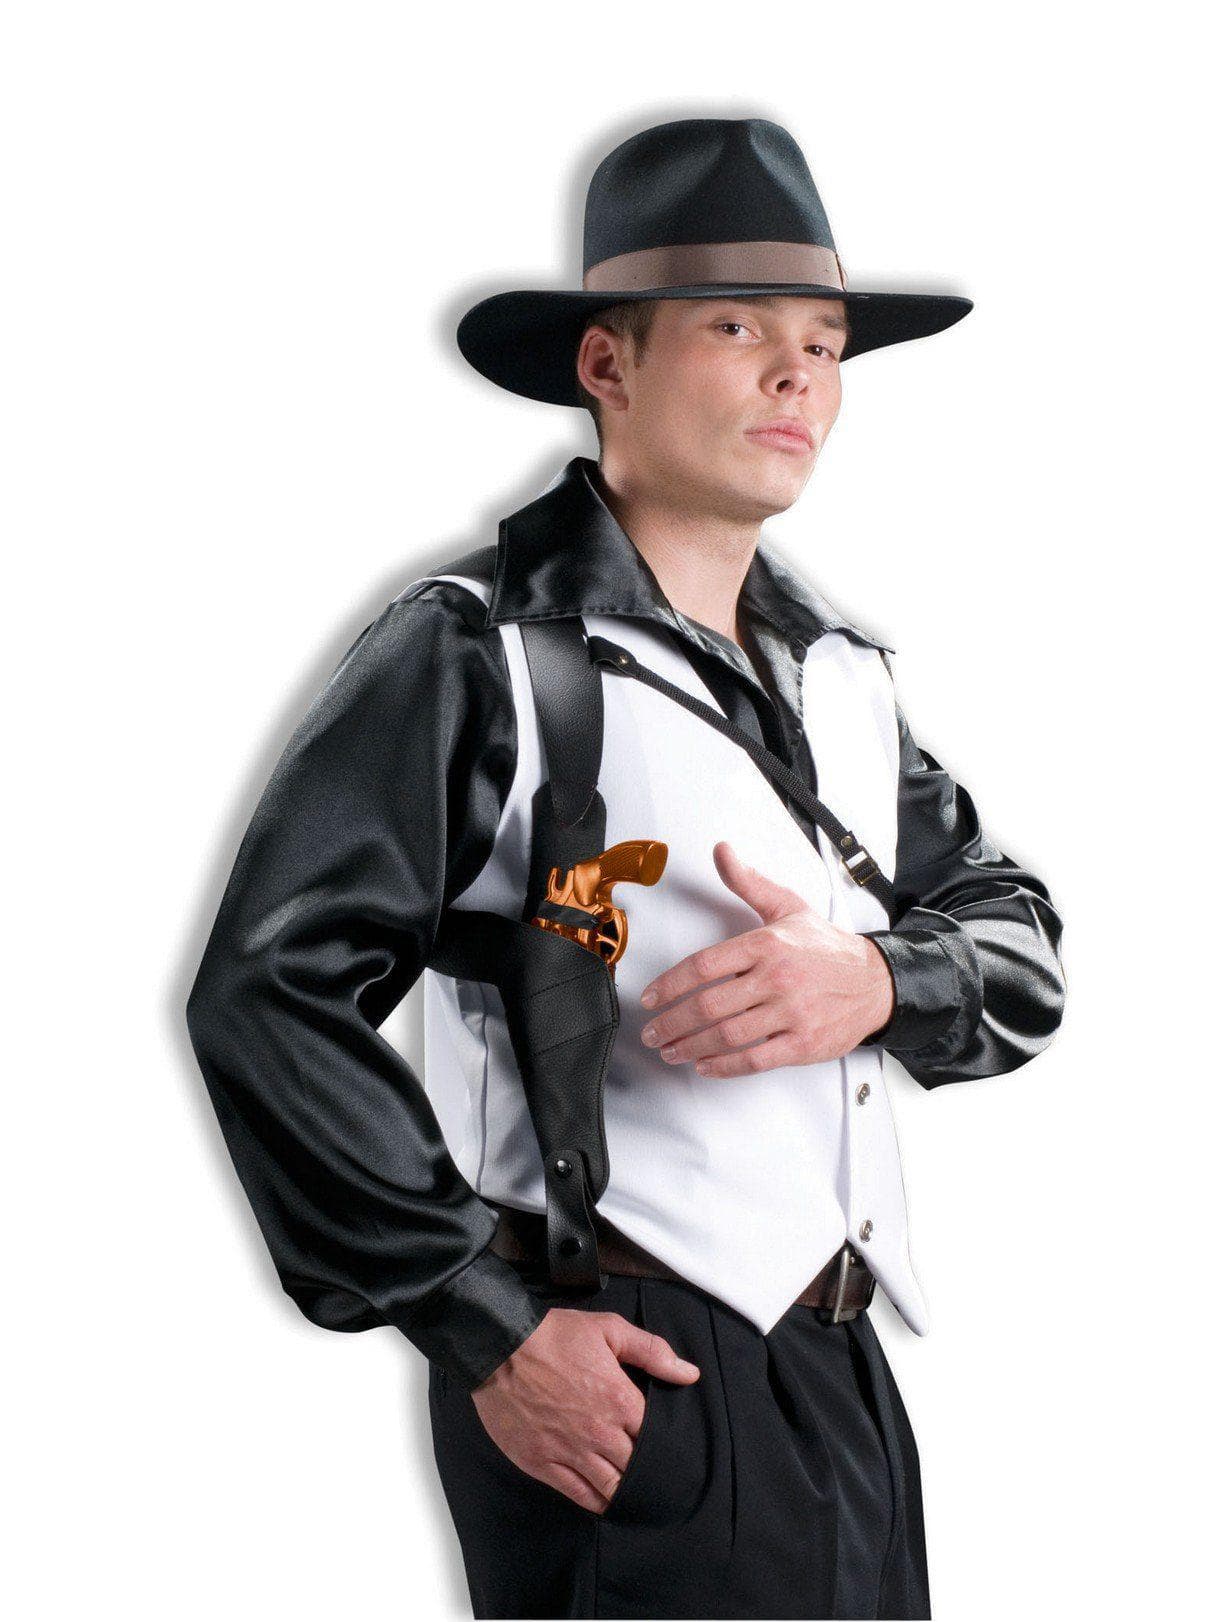 Gangster Holster and Gun Accessory - costumes.com